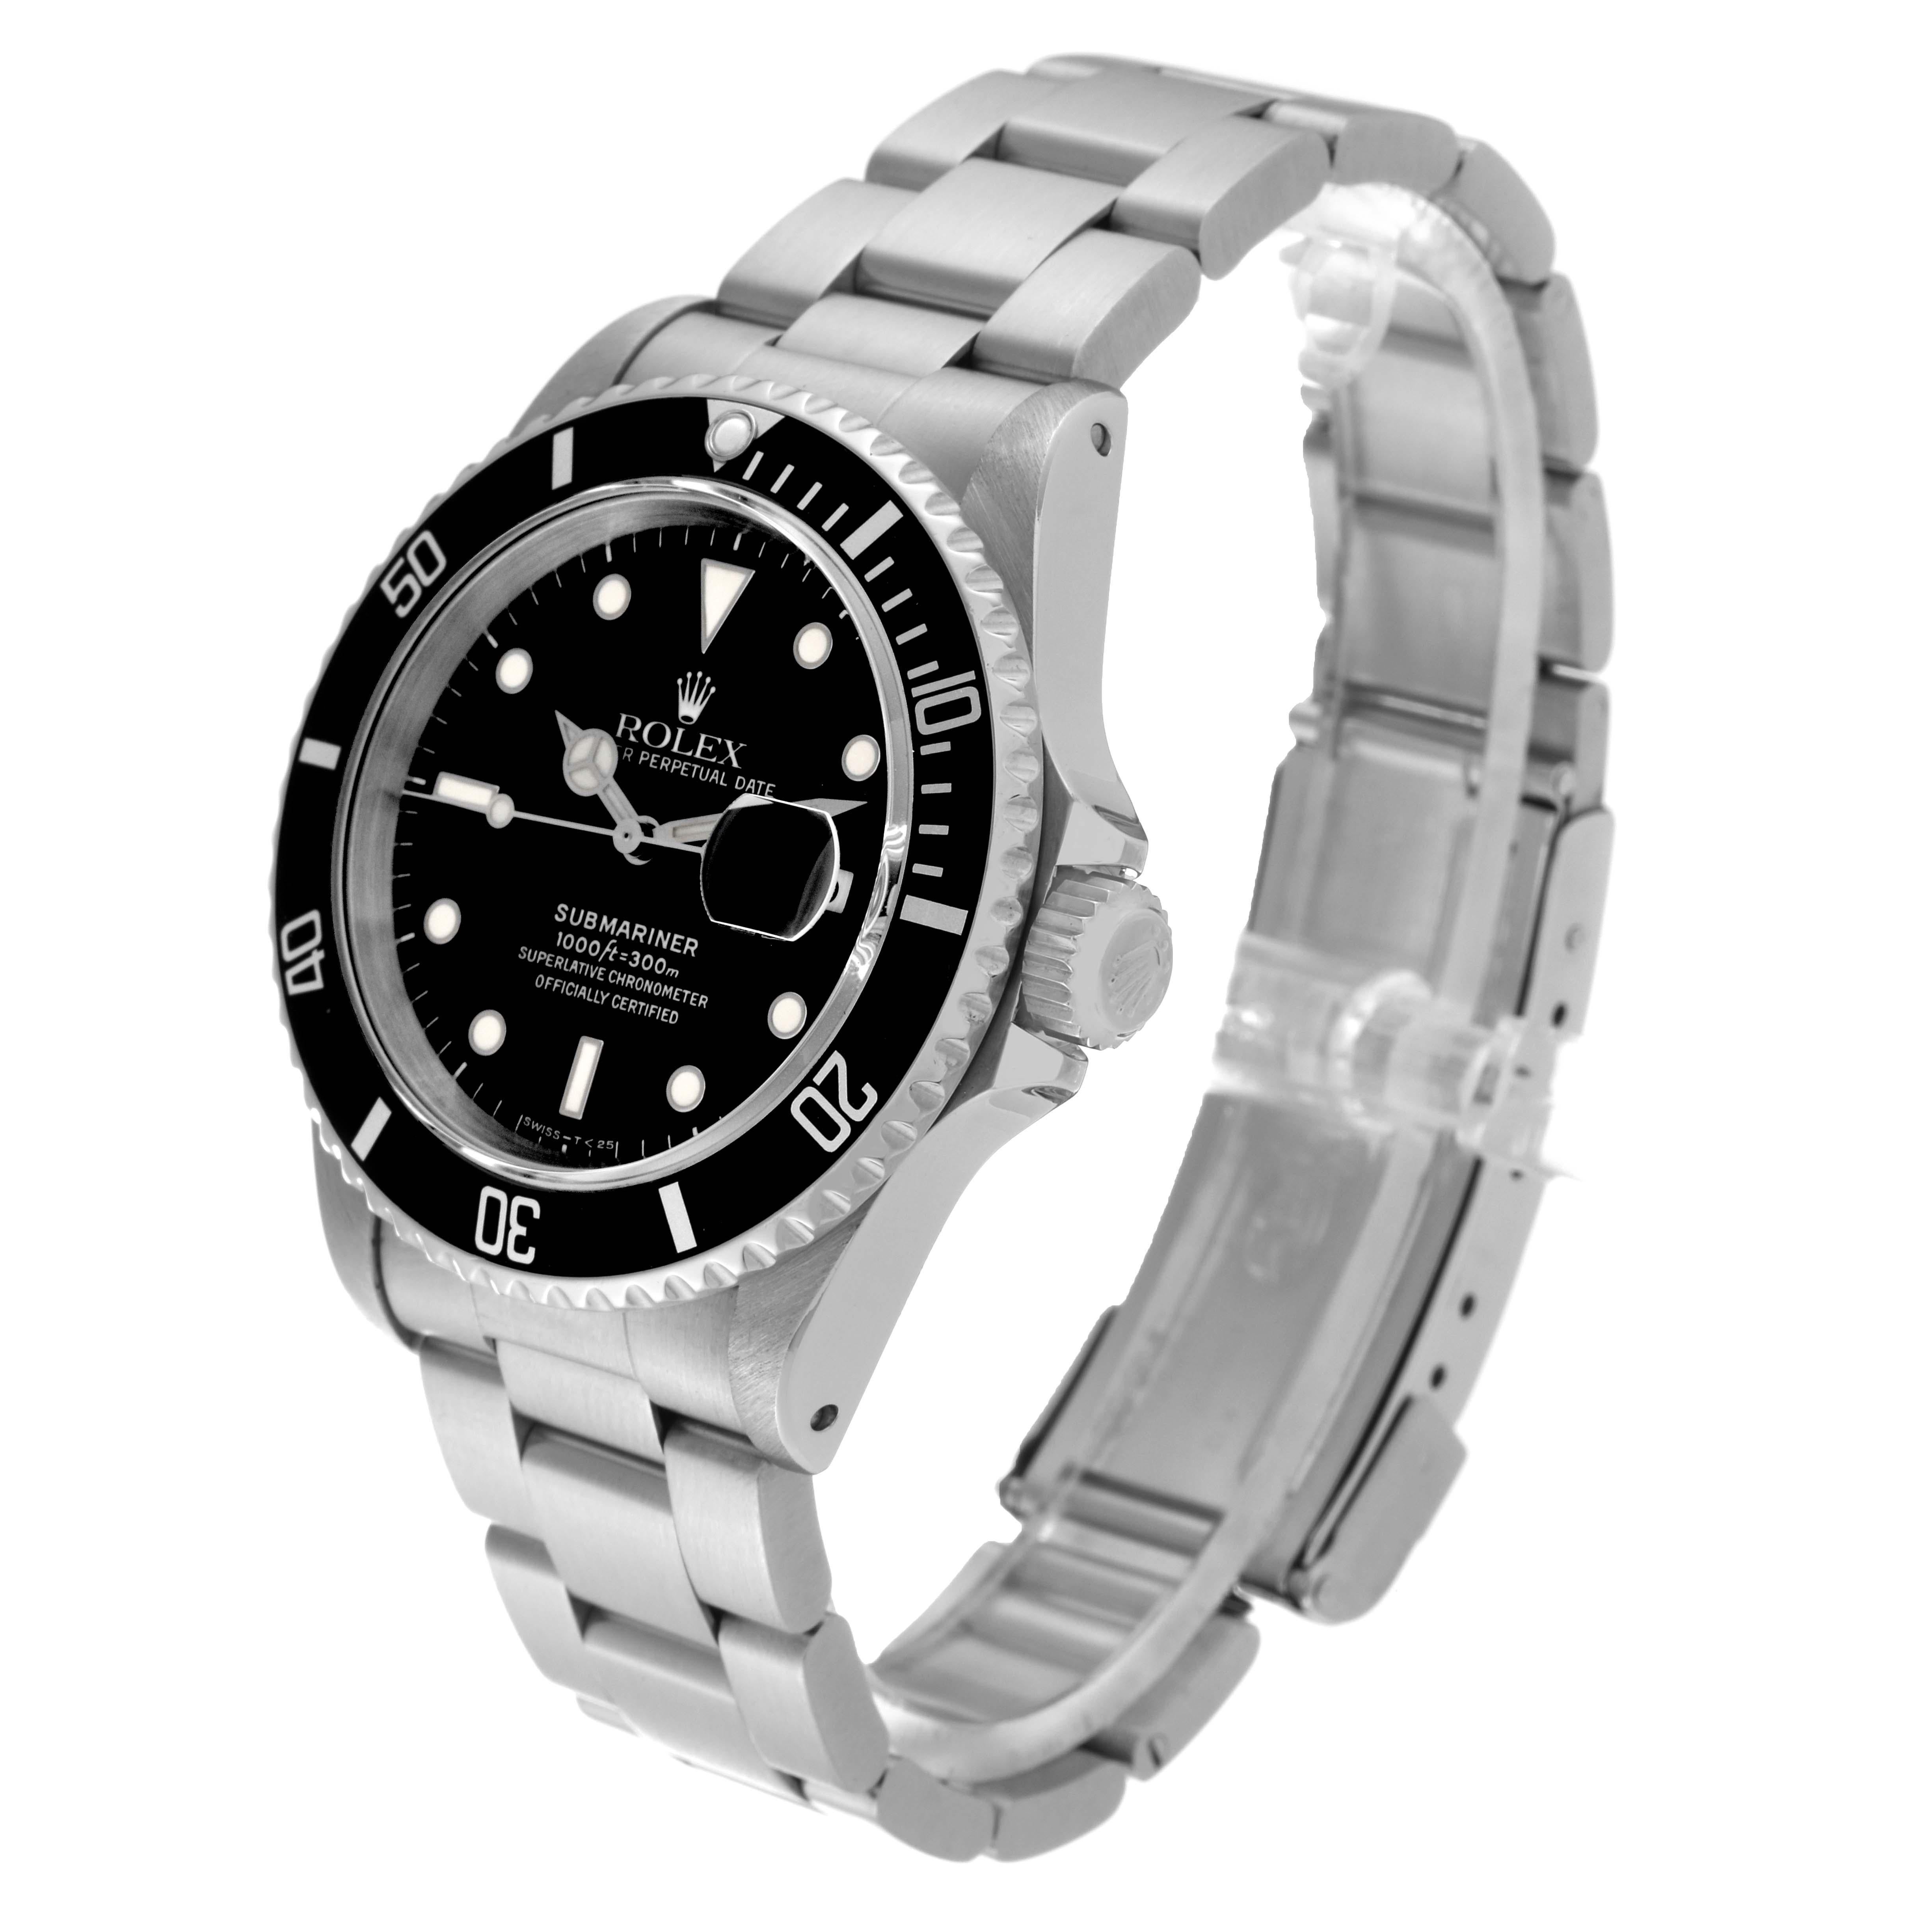 Rolex Submariner Date Black Dial Steel Mens Watch 16610 Box Papers For Sale 8